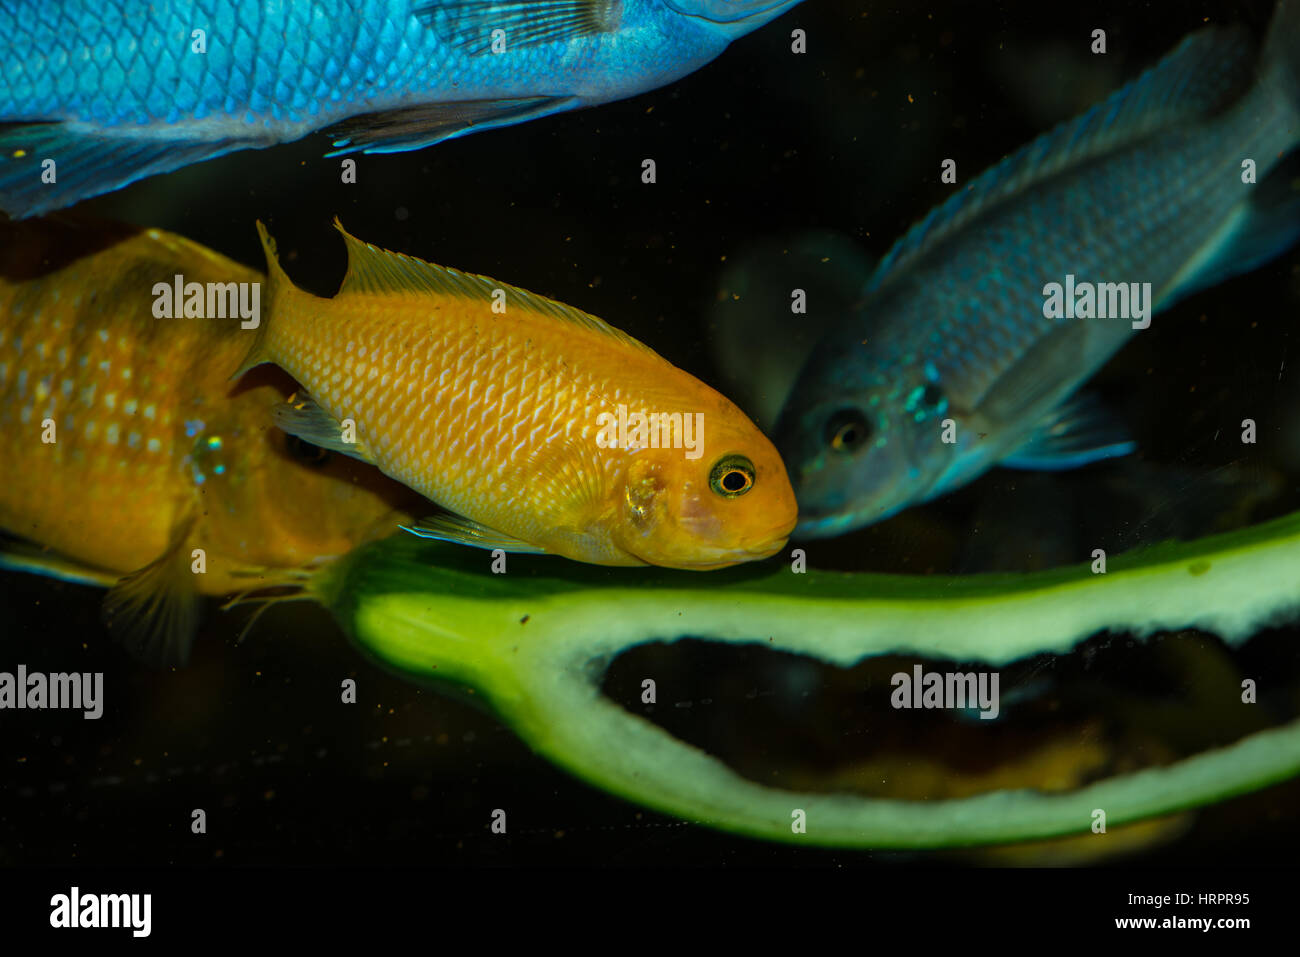 Colorful tropical fish close up Stock Photo